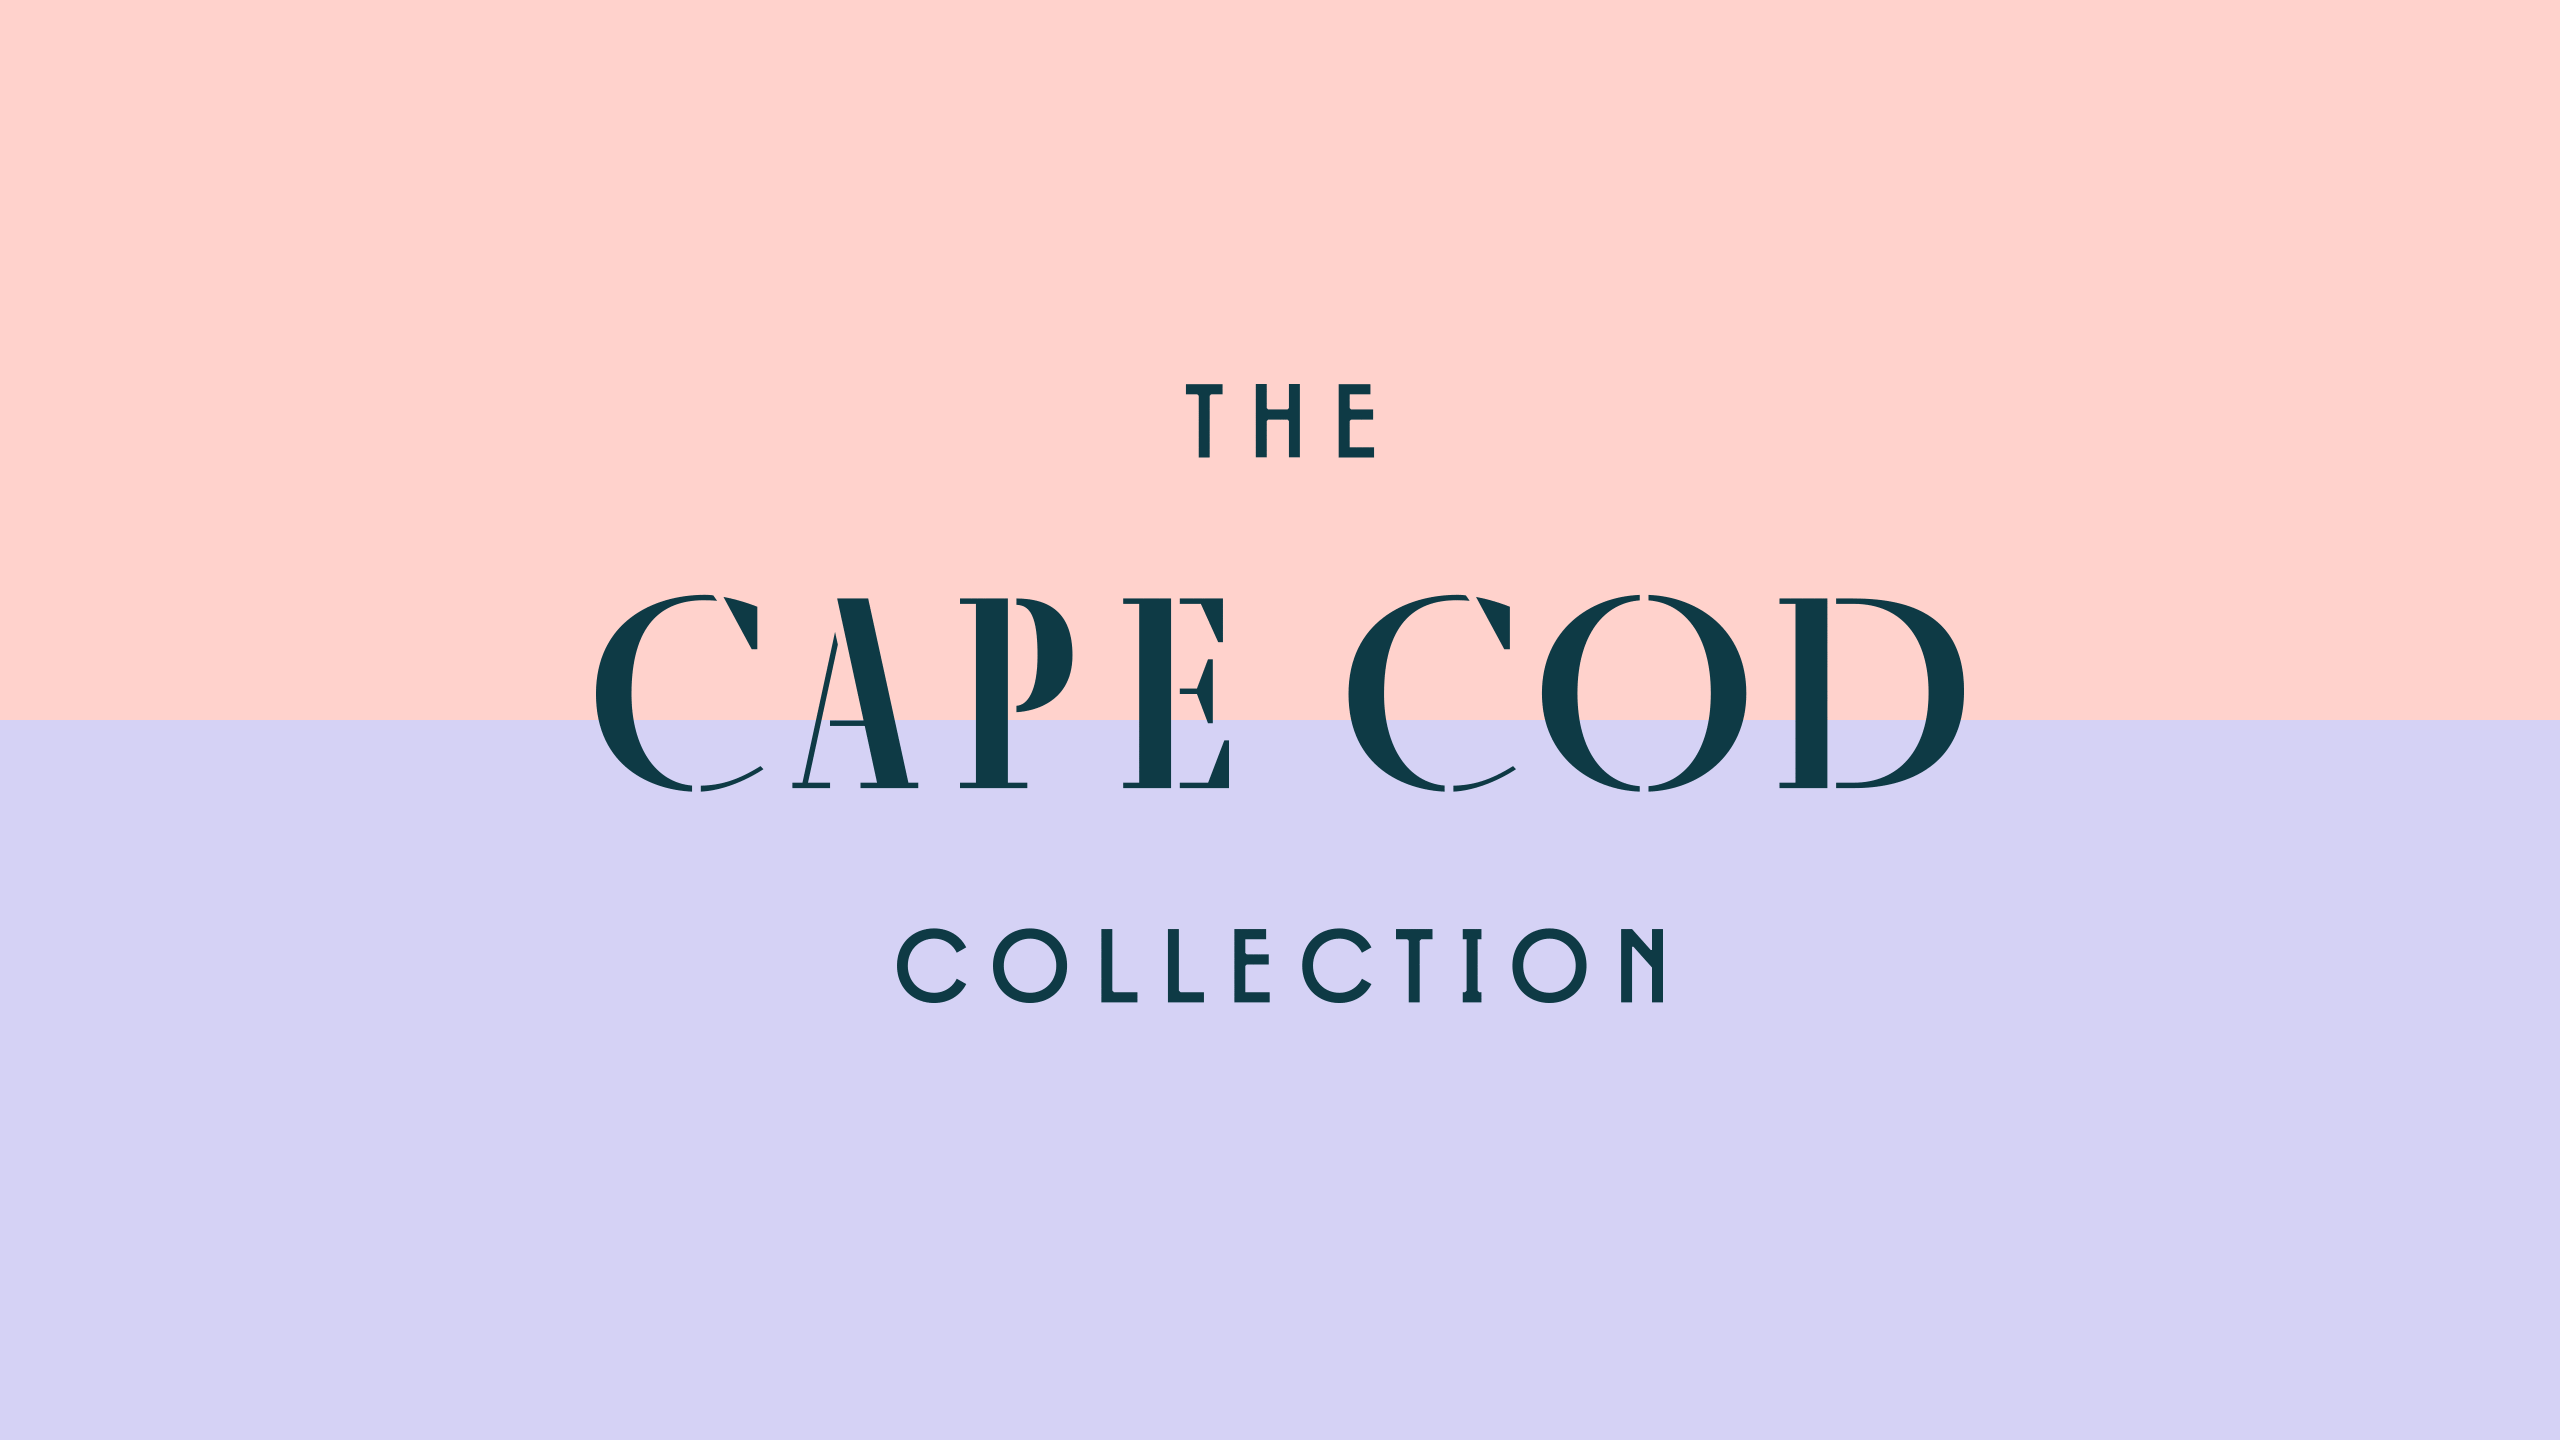 The Cape Cod Collection